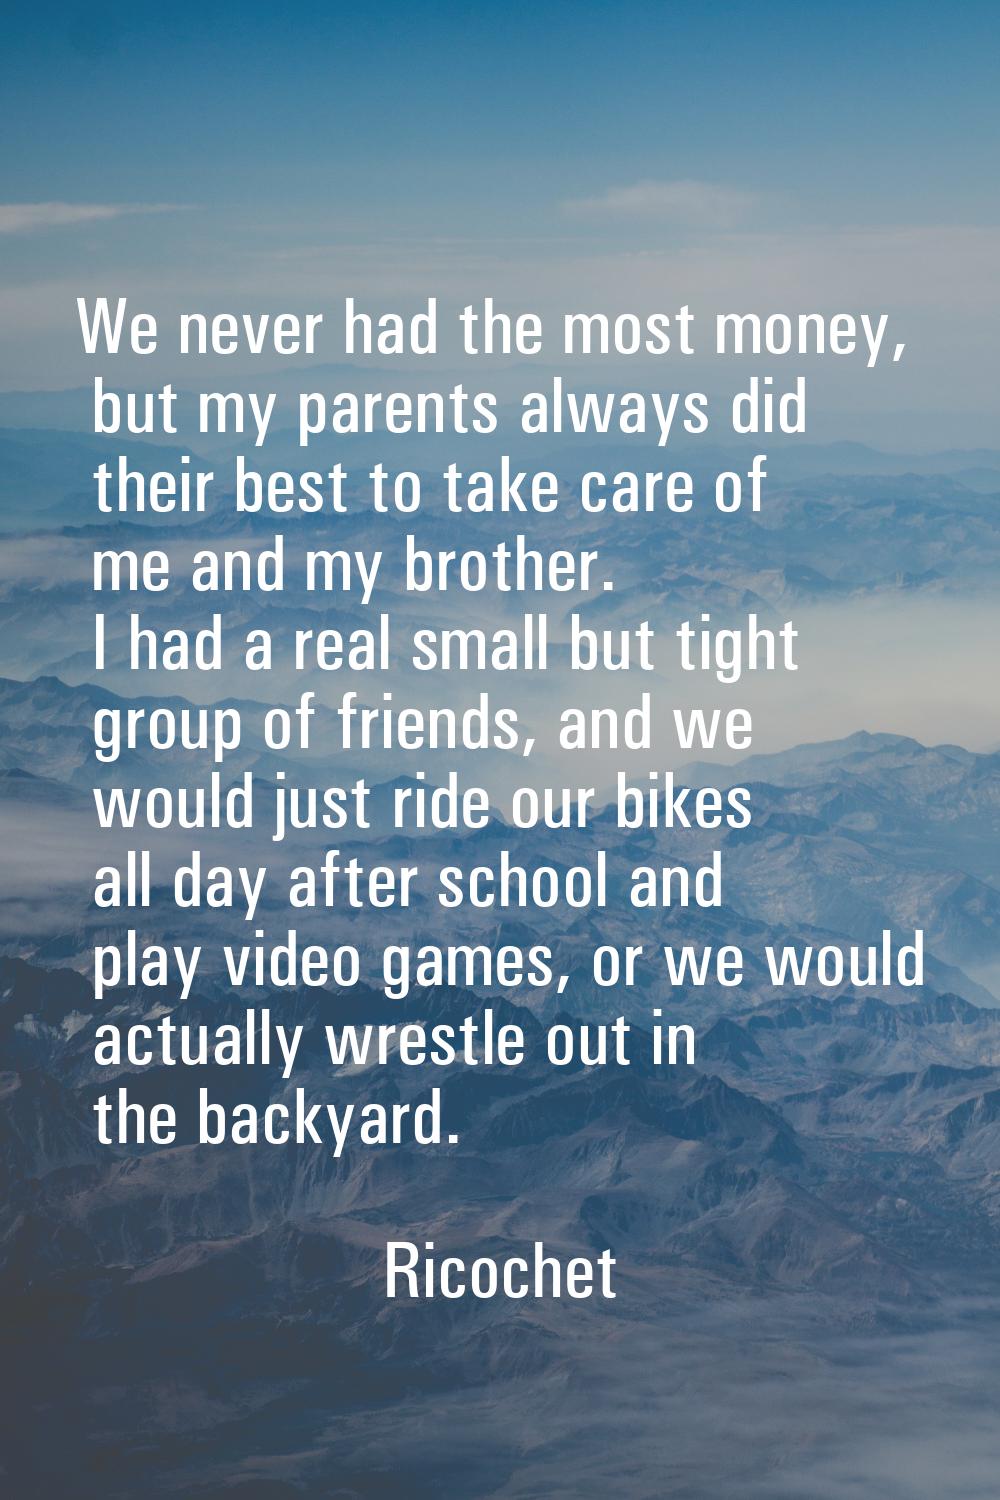 We never had the most money, but my parents always did their best to take care of me and my brother